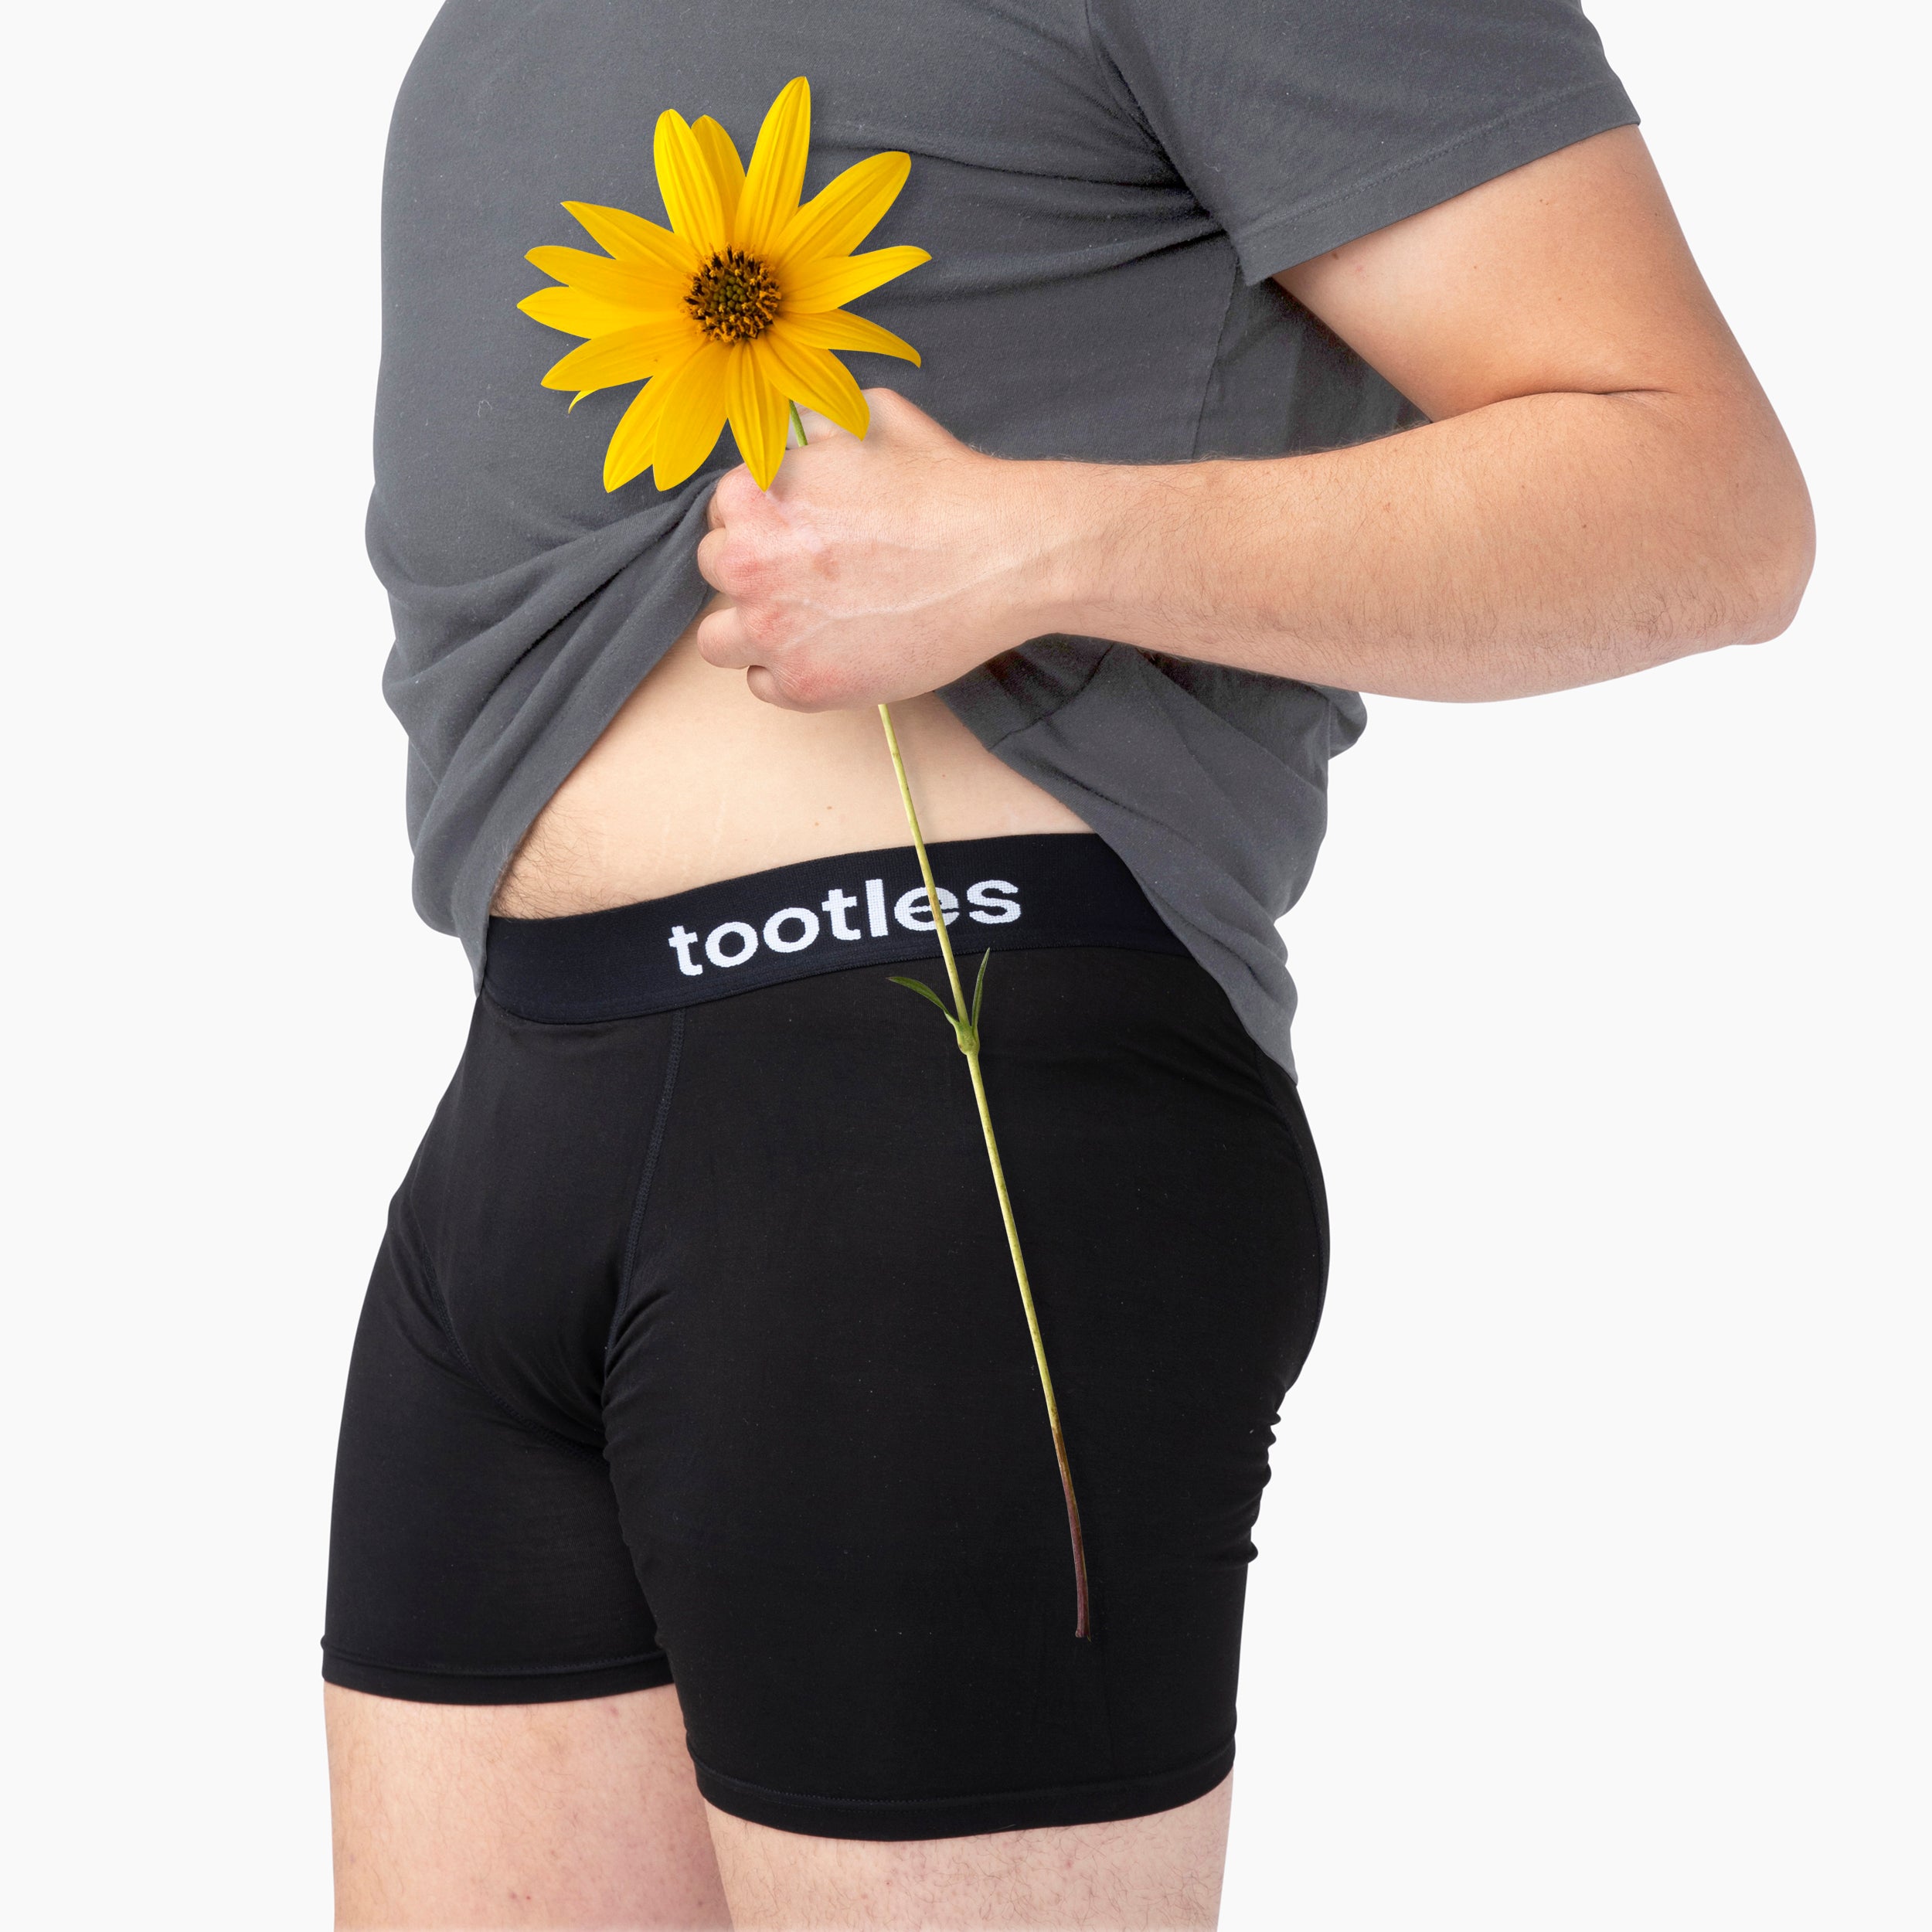 Comprar Fart Filtering Underwear by TOOTLES - Mens Boxer Briefs With 100%  Activated Charcoal Underwear Liners - Neutralizes & Eliminates Flatulence  Odor - 95% Bamboo Cotton, 5% Spandex en USA desde Costa Rica